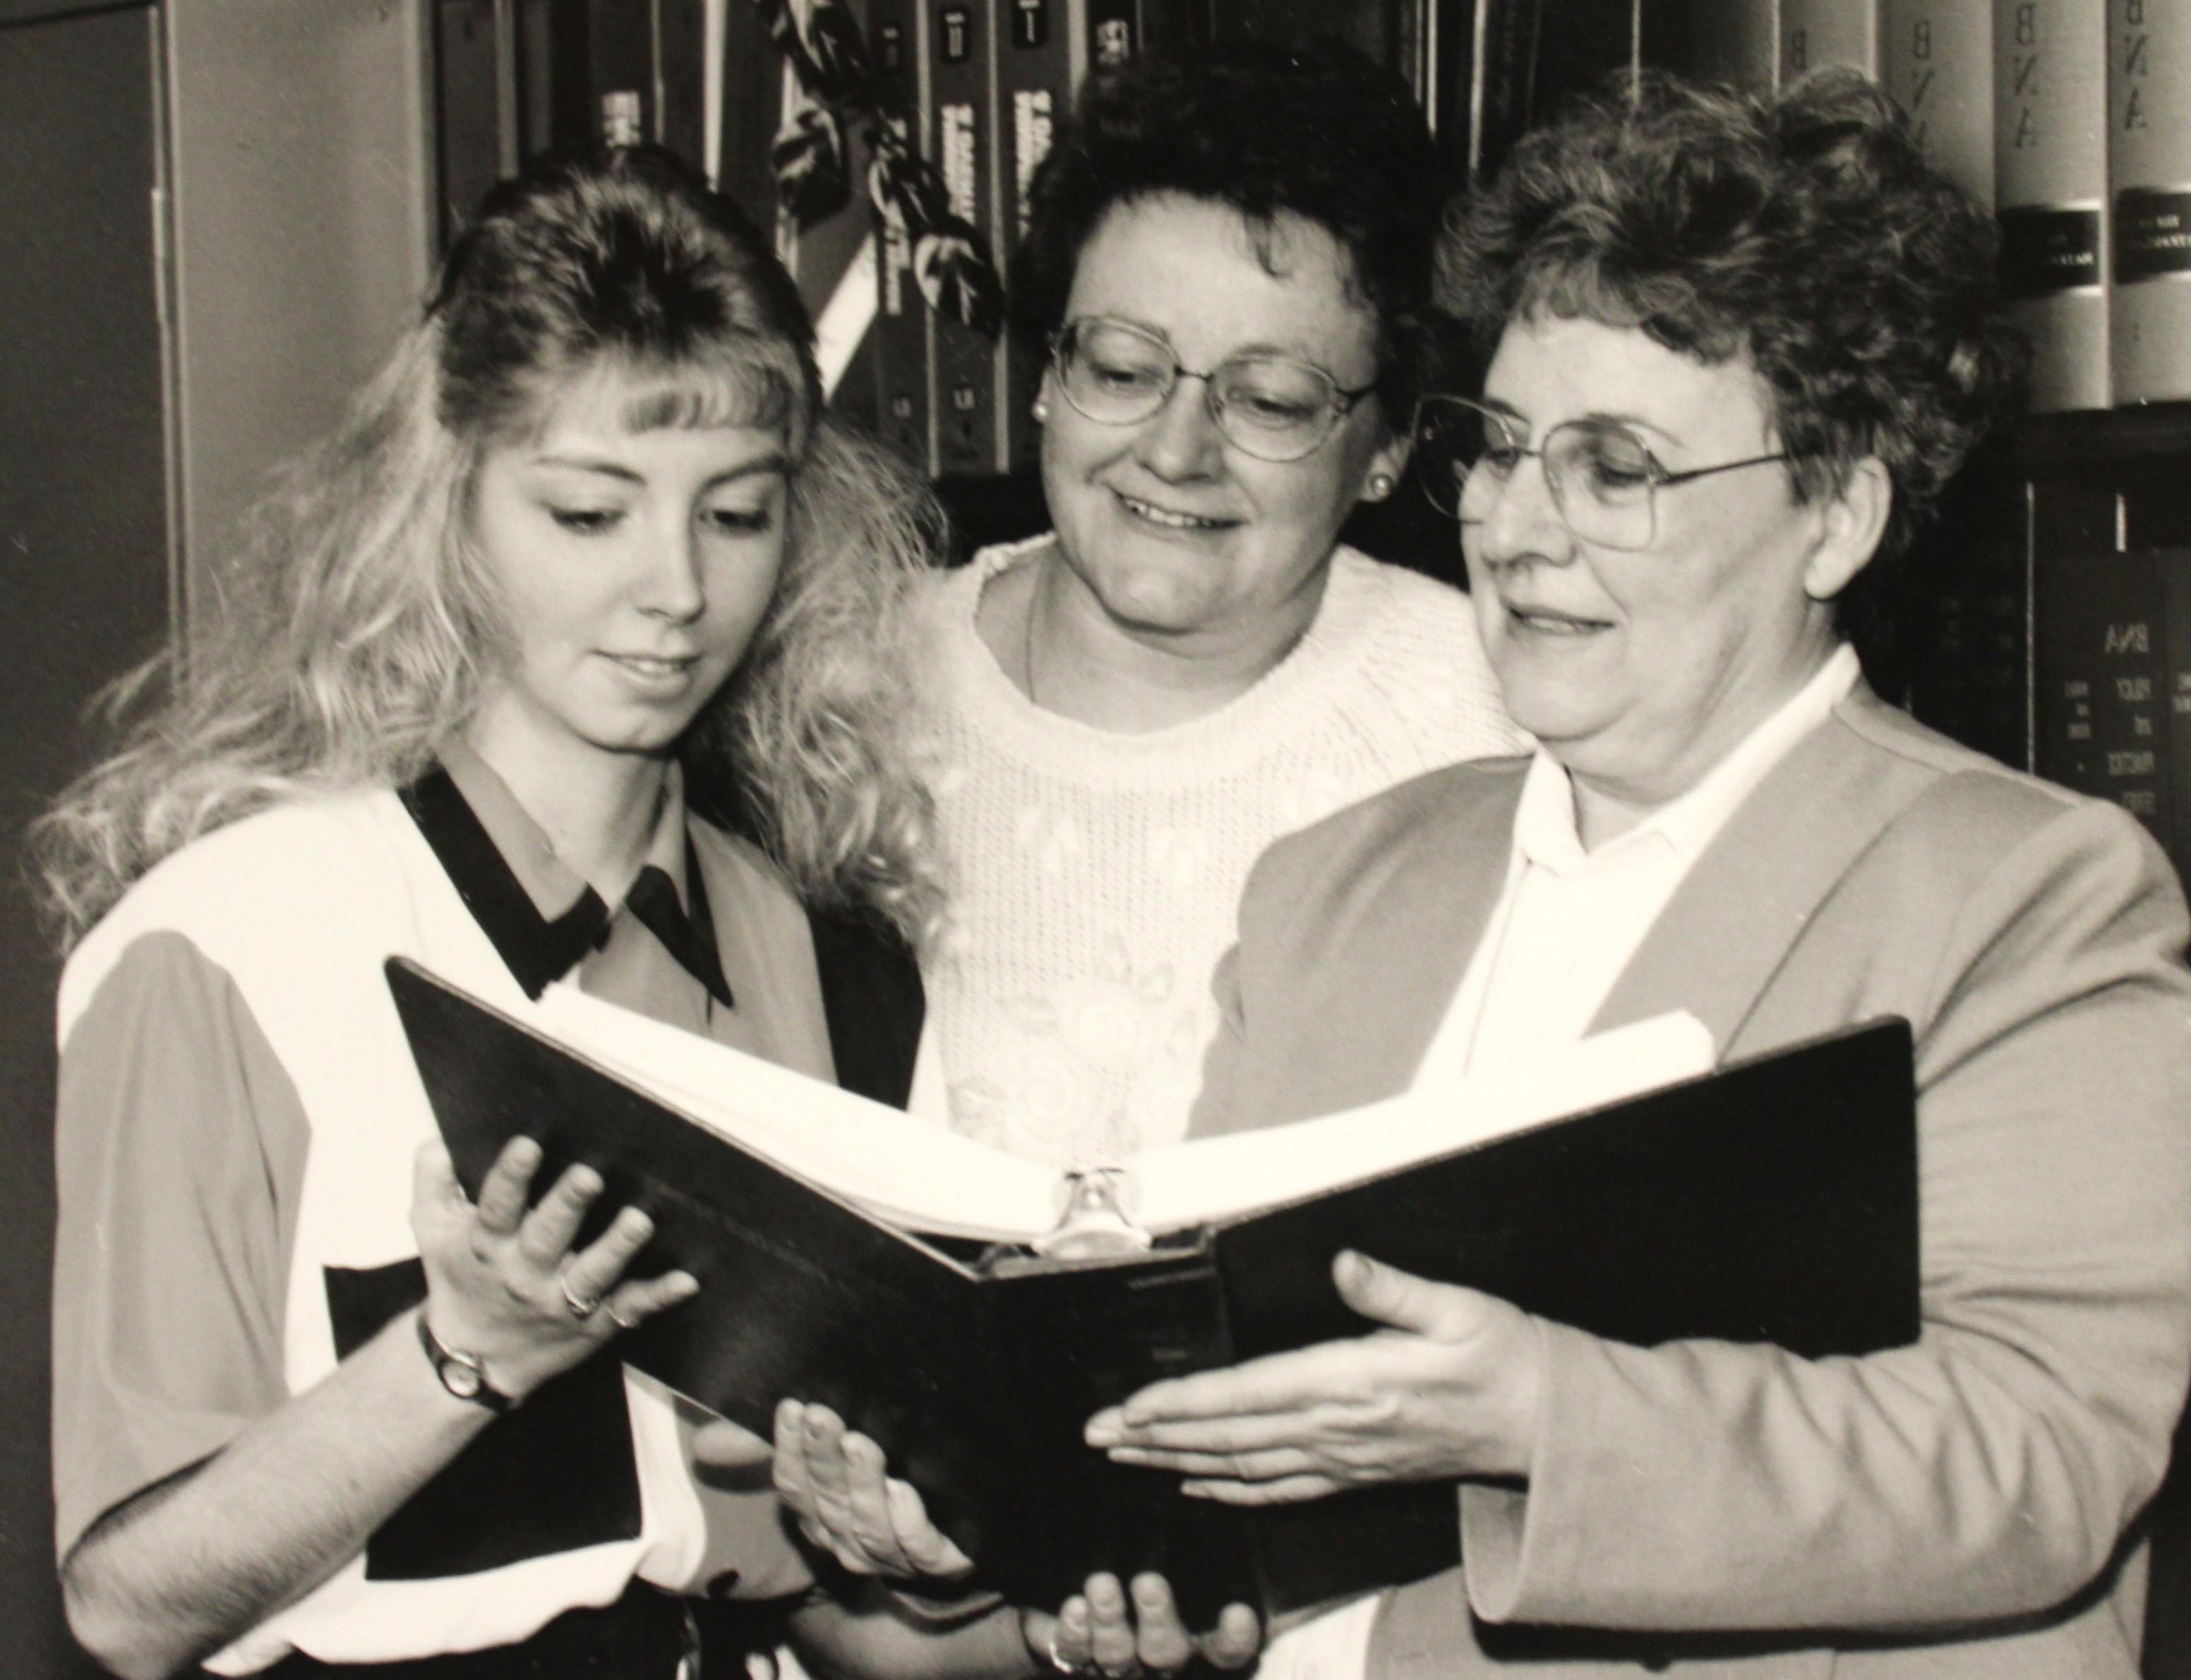 Three employees of the Wadena college, on campus in 1994